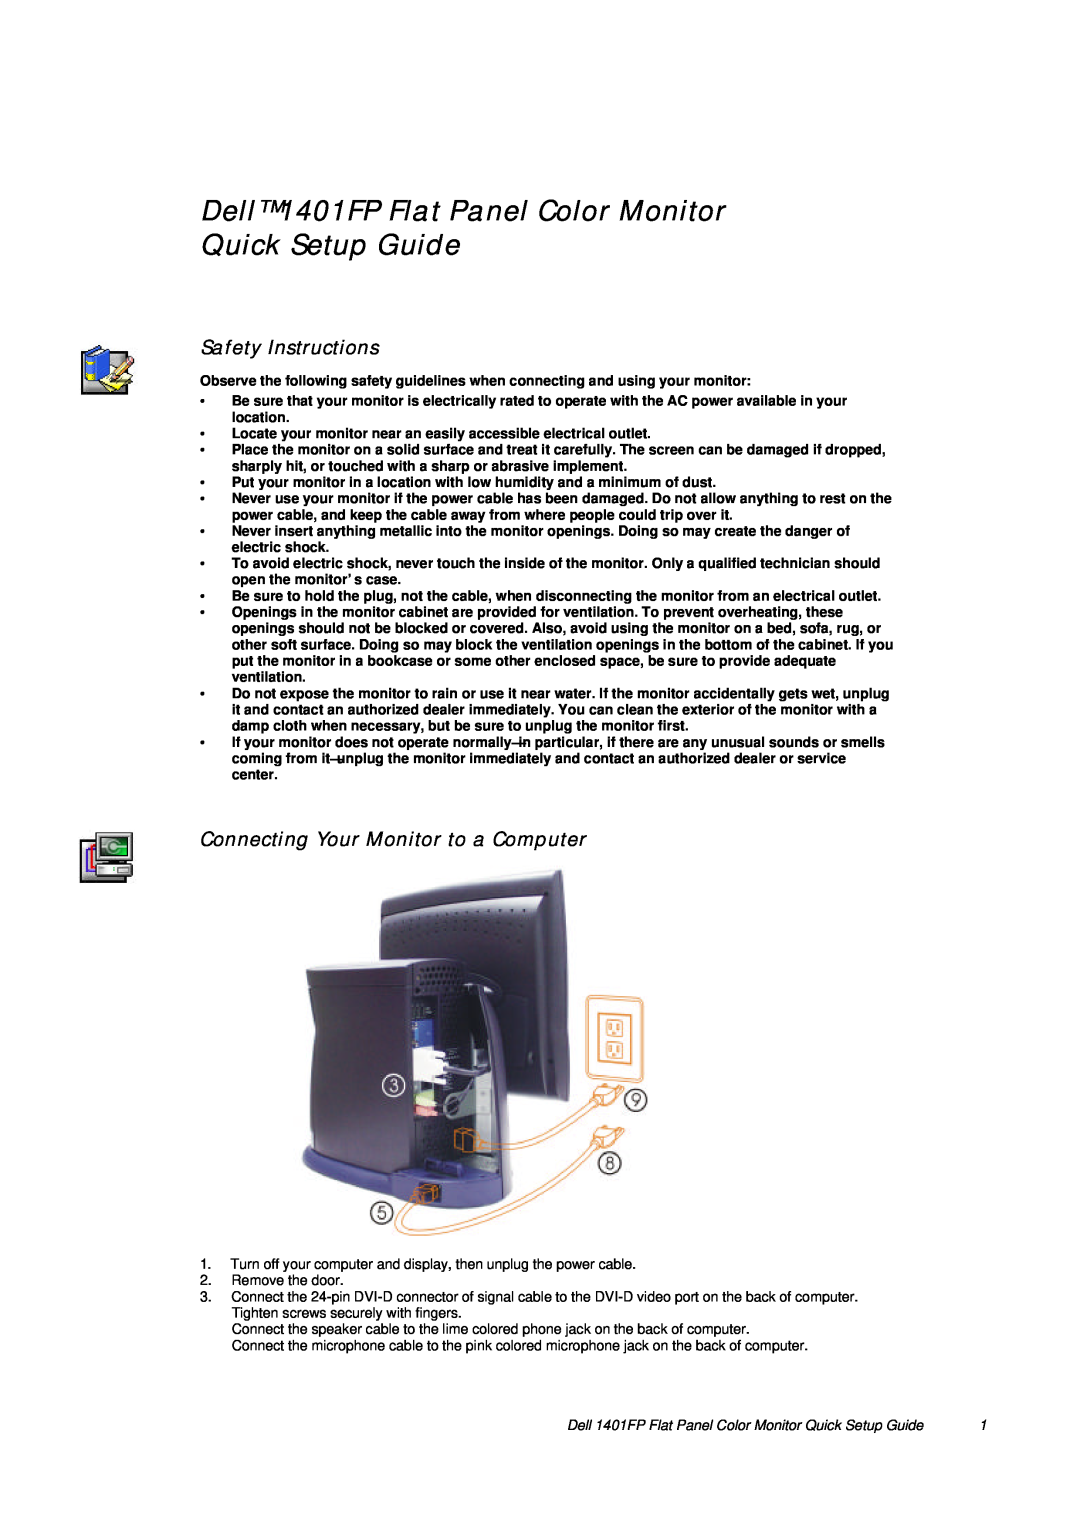 Dell 1401FP setup guide Safety Instructions, Connecting Your Monitor to a Computer 